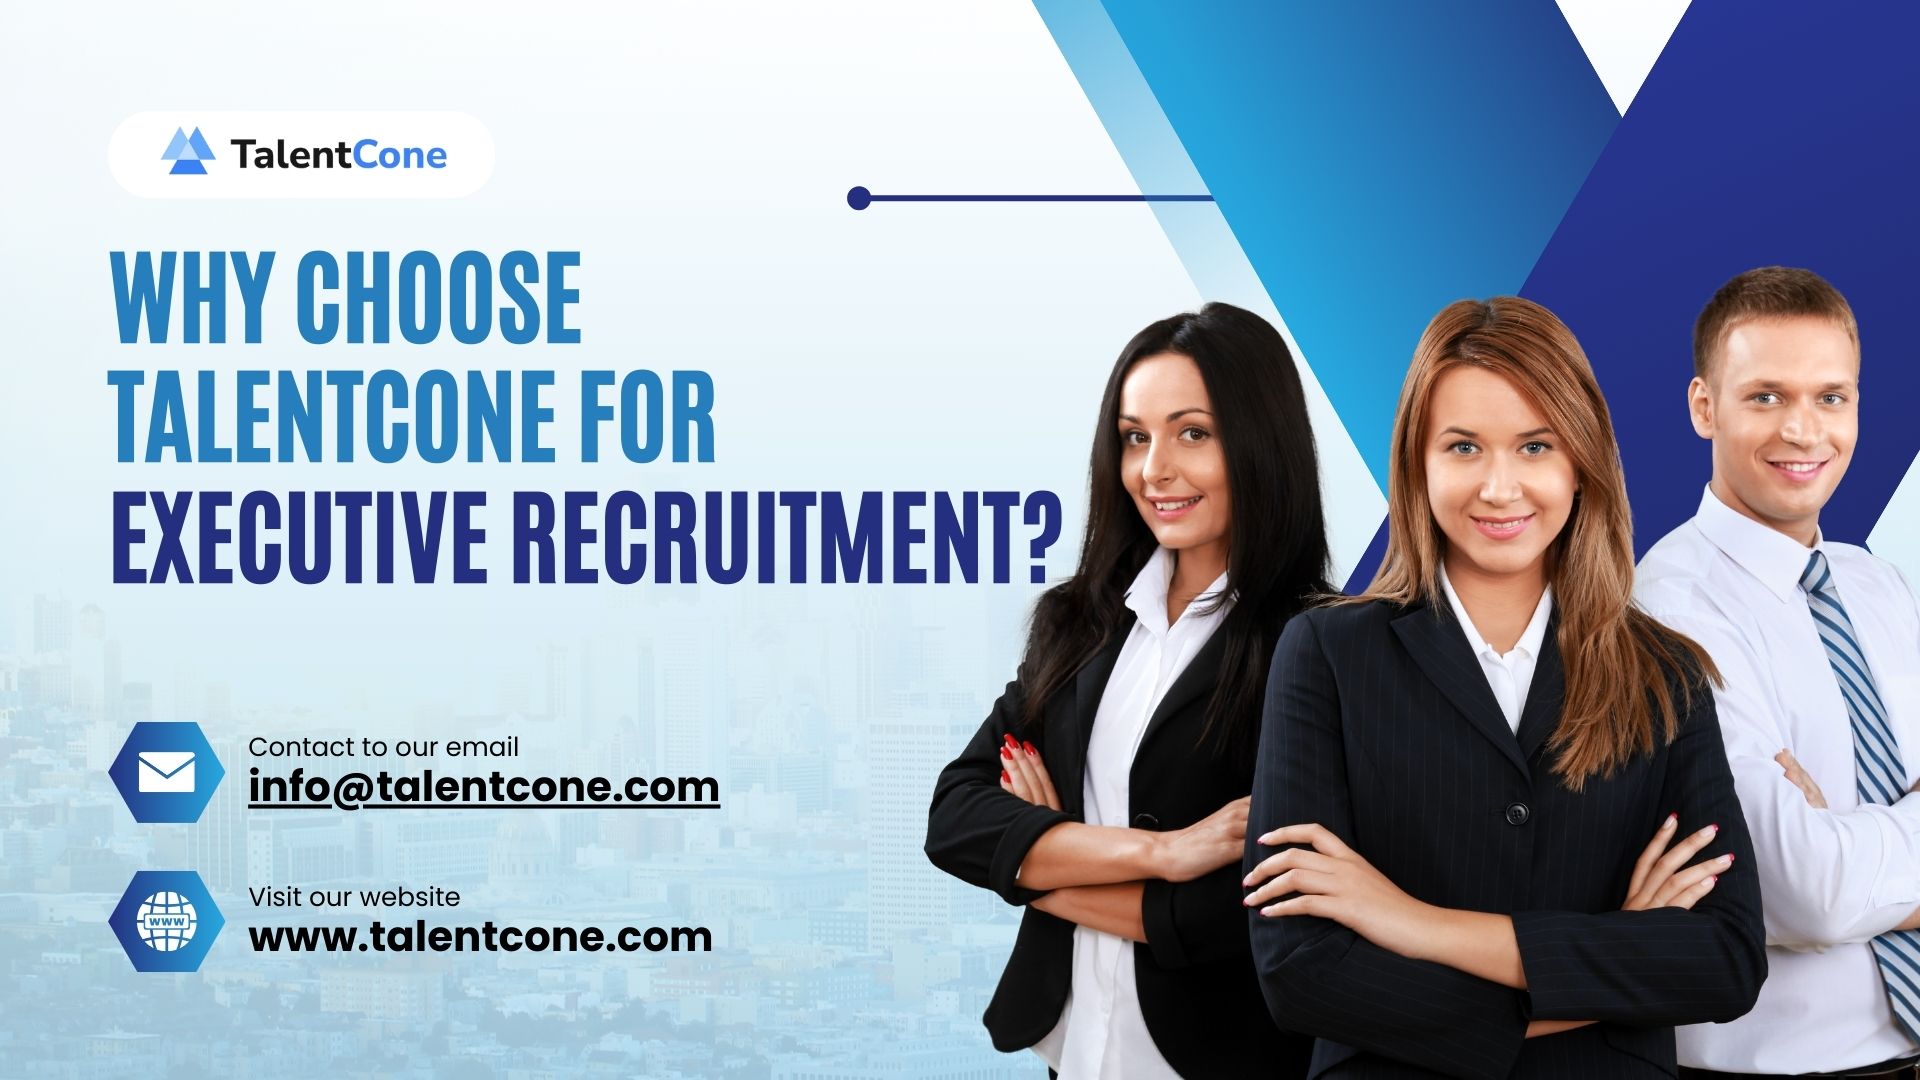 Why You Need Executive Hiring Services – TalentCone